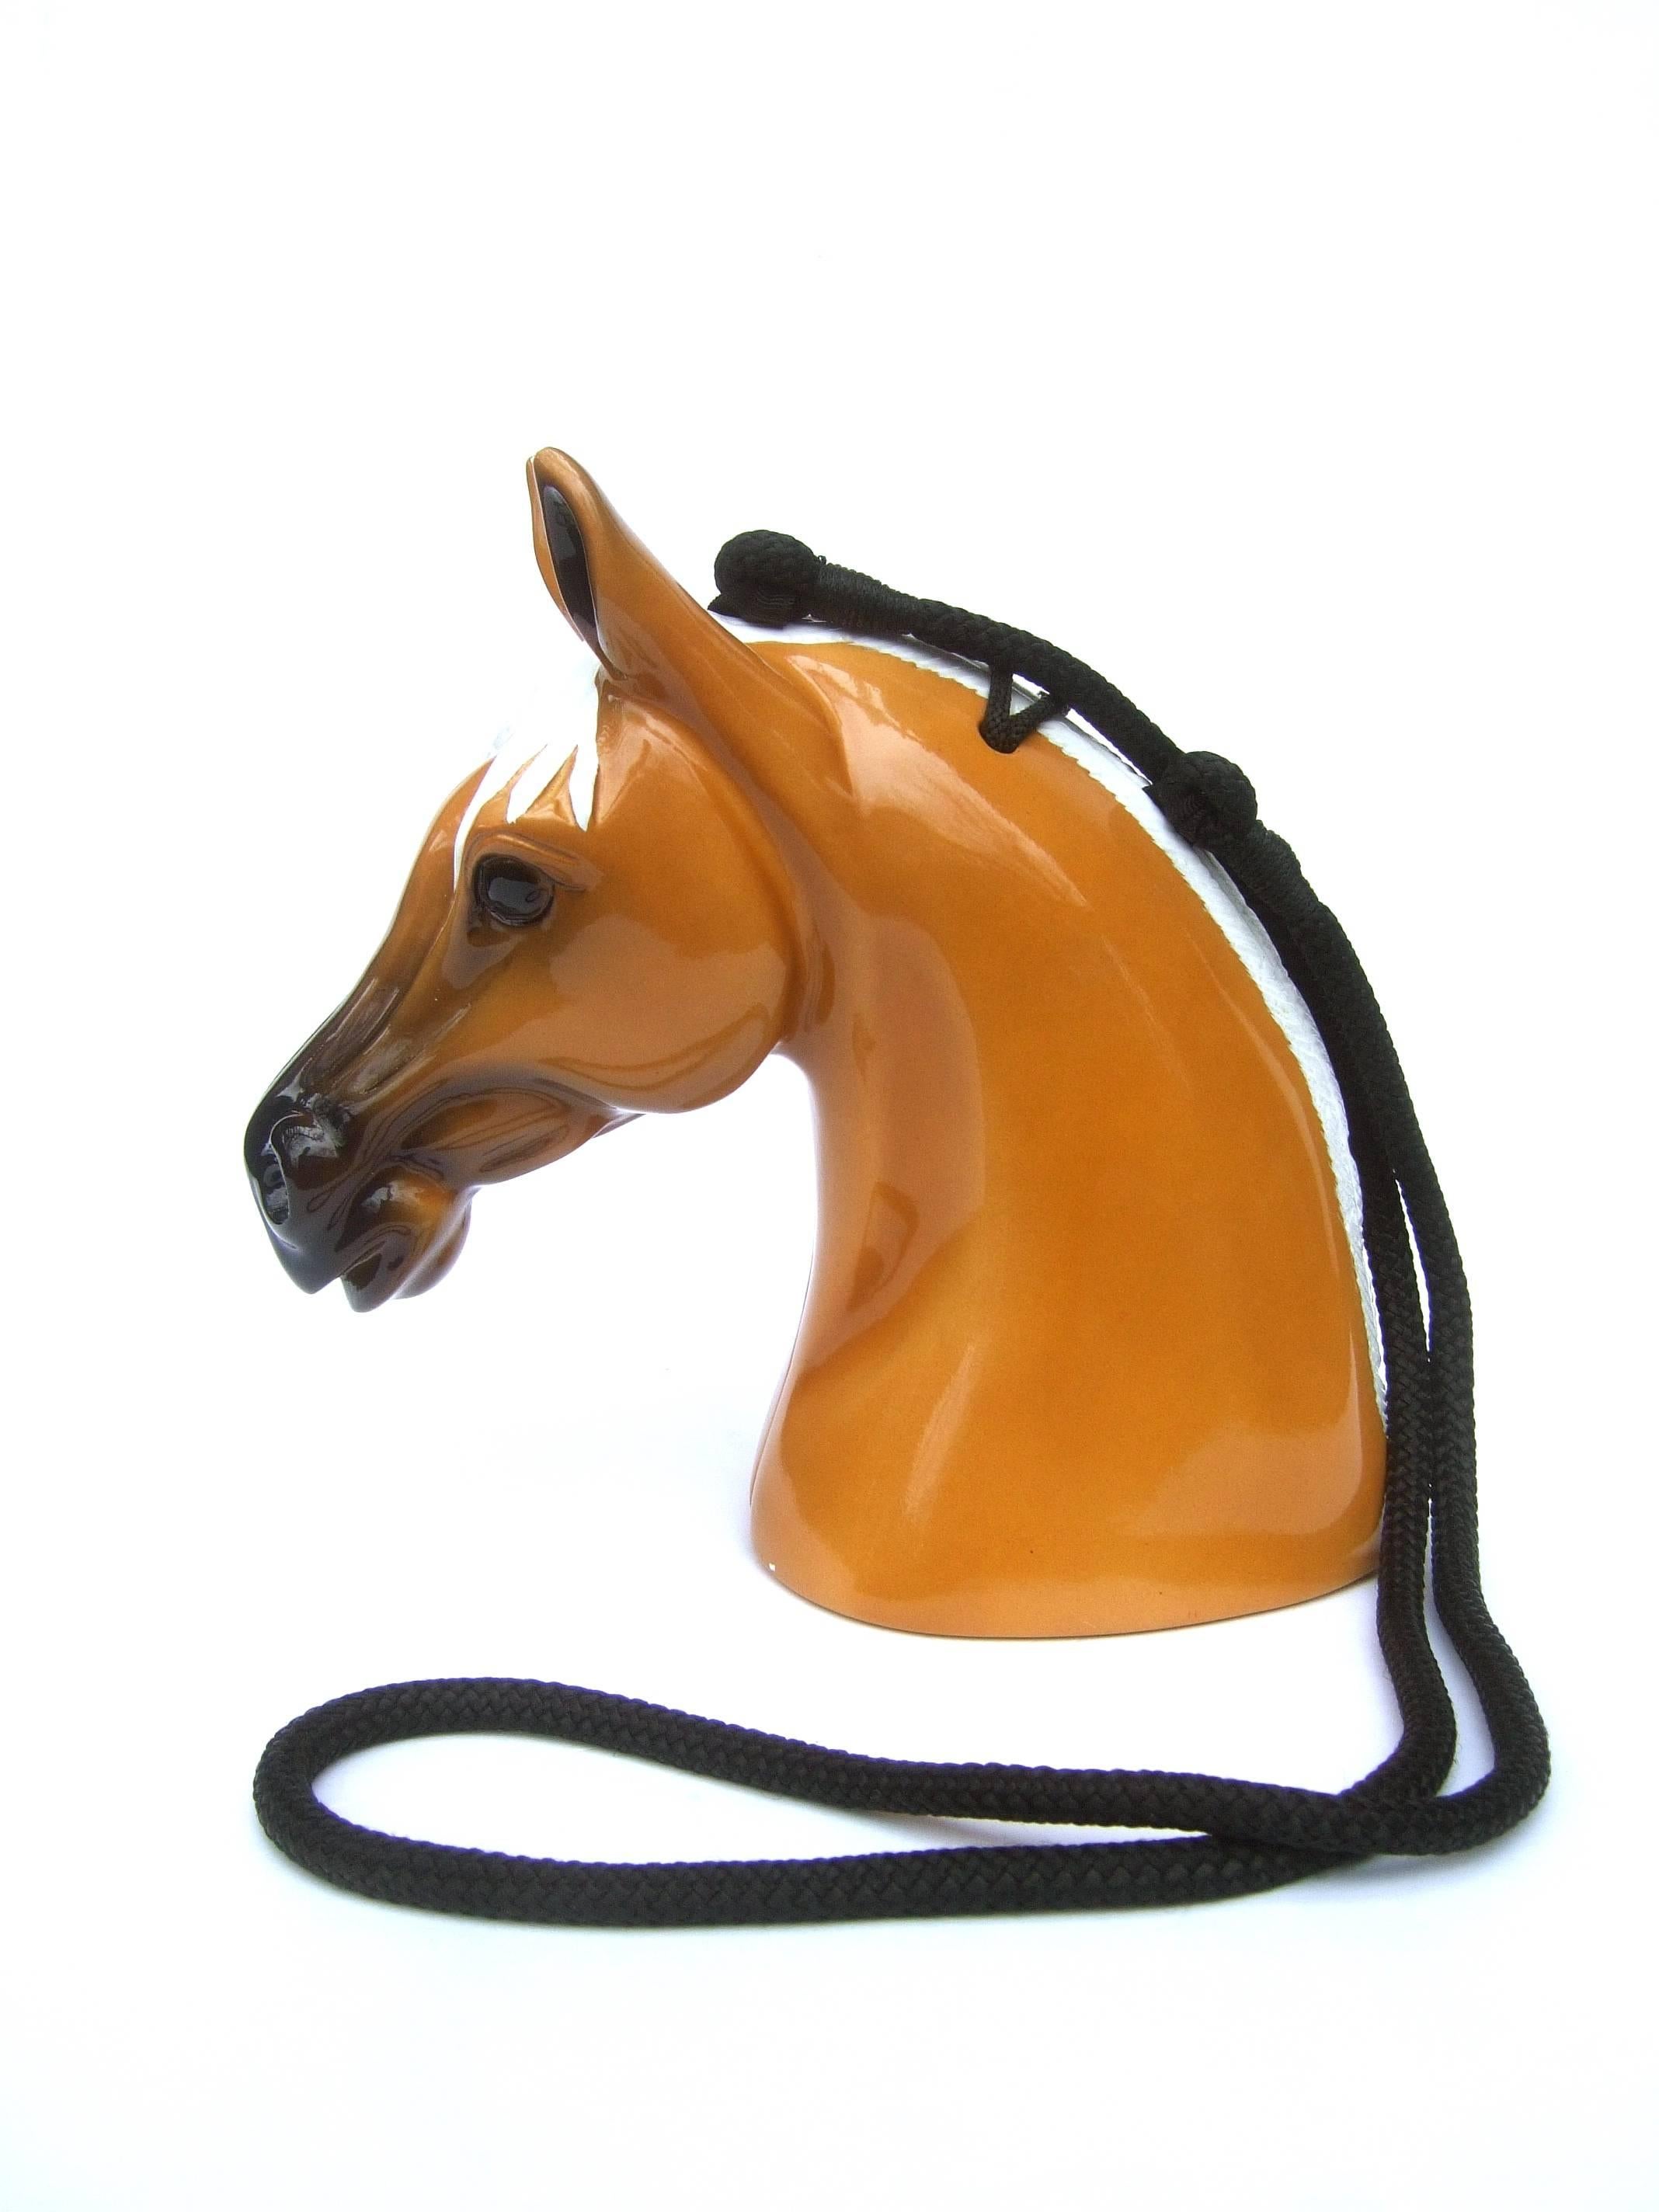 Timmy Woods Beverly Hills Wood artisan equine handbag c 1990s
The unique hand carved wood horse theme handbag is sheathed 
in glossy caramel color light brown enamel on one side

The other side profile is white enamel emulating the mane with sinuous